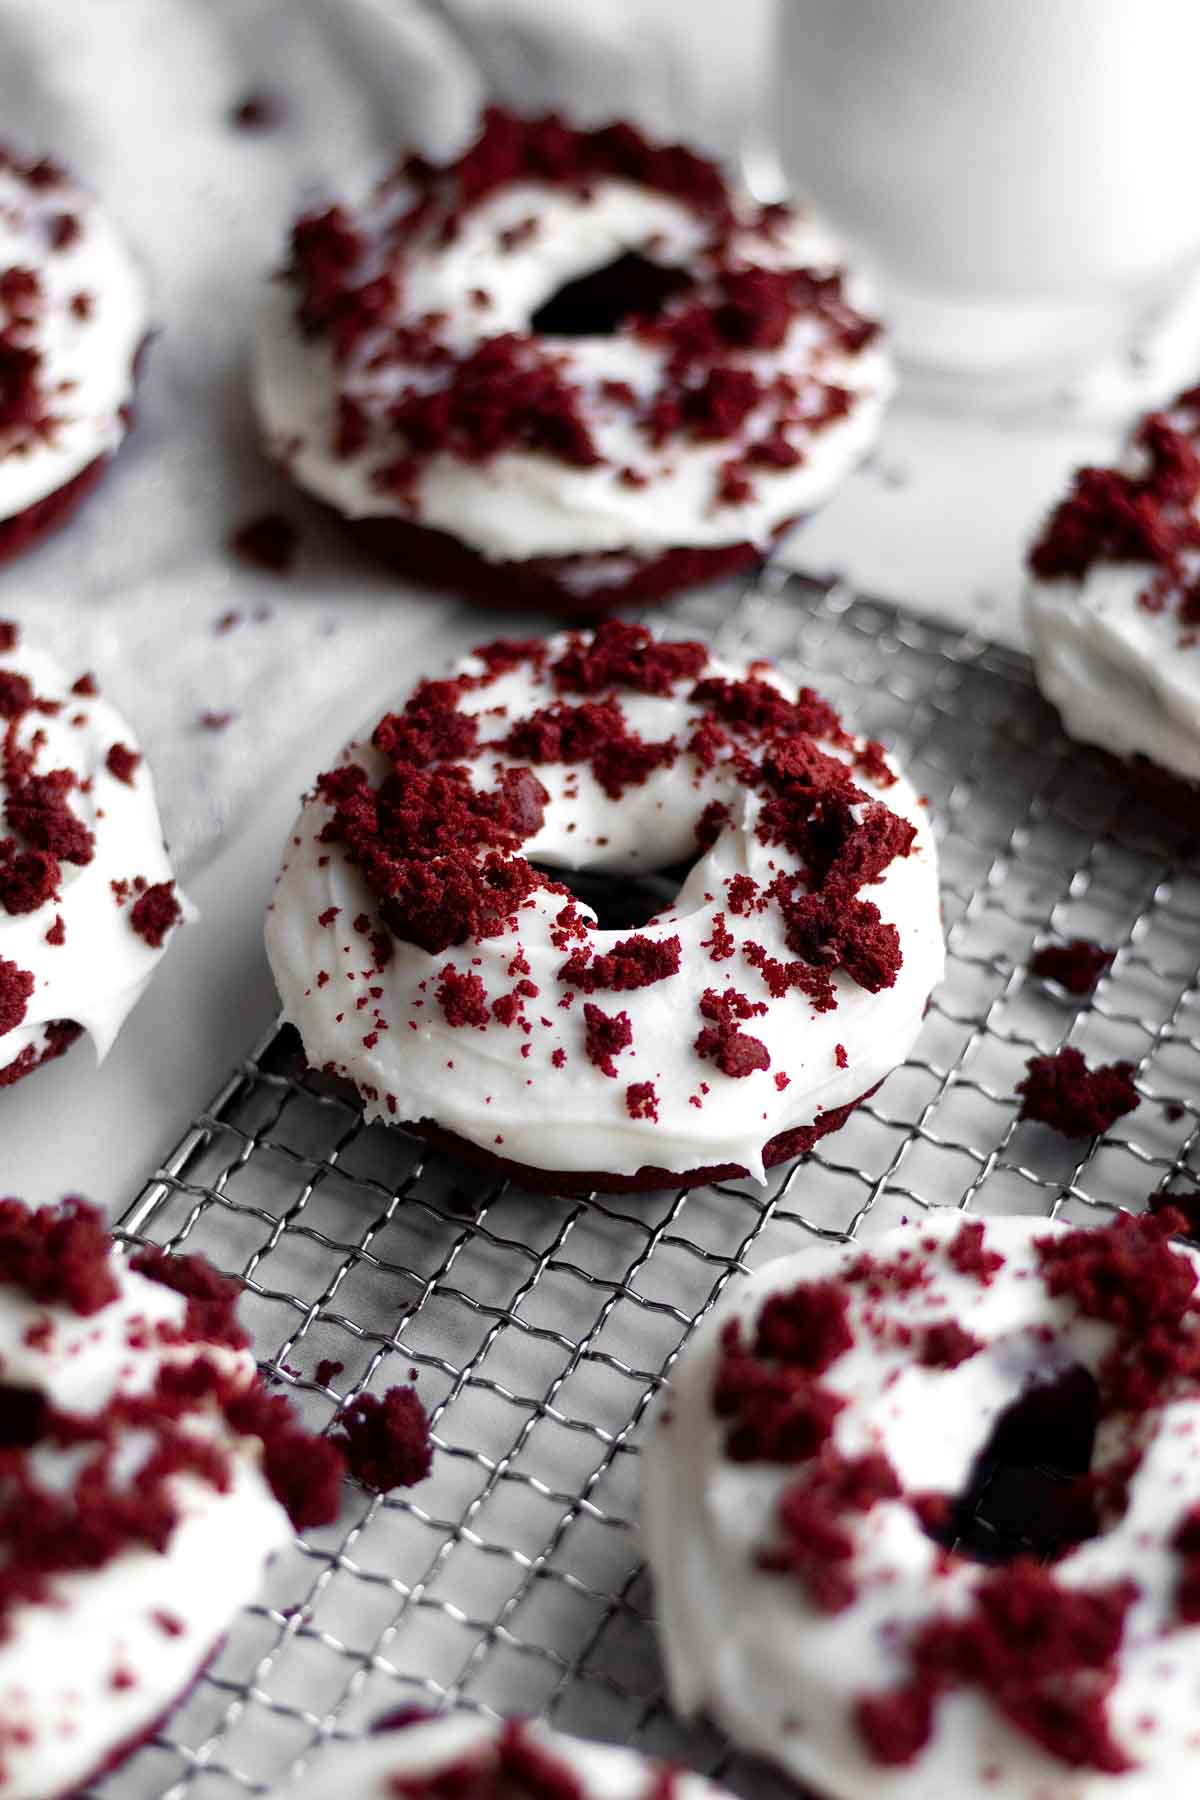 A Red Velvet Donut with white frosting and red velvet crumbs.